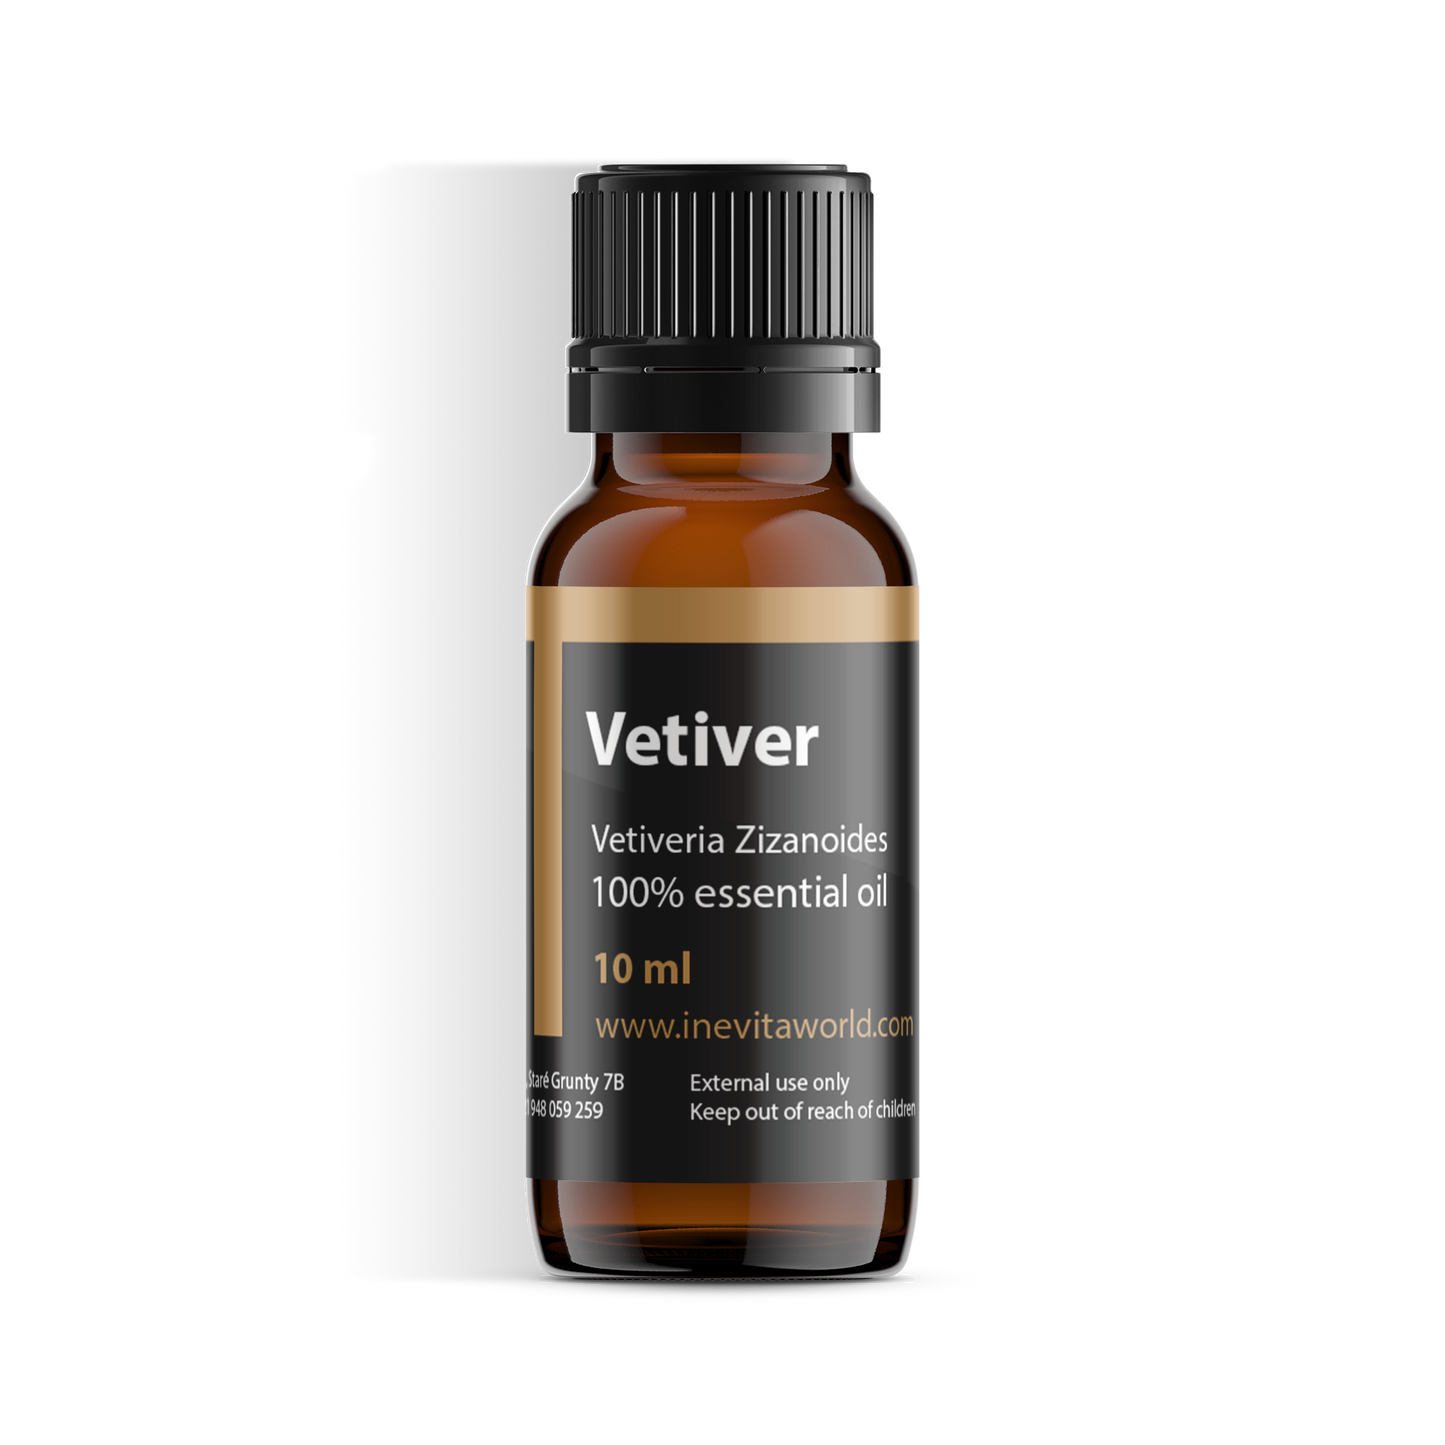 Vetiver Absolute